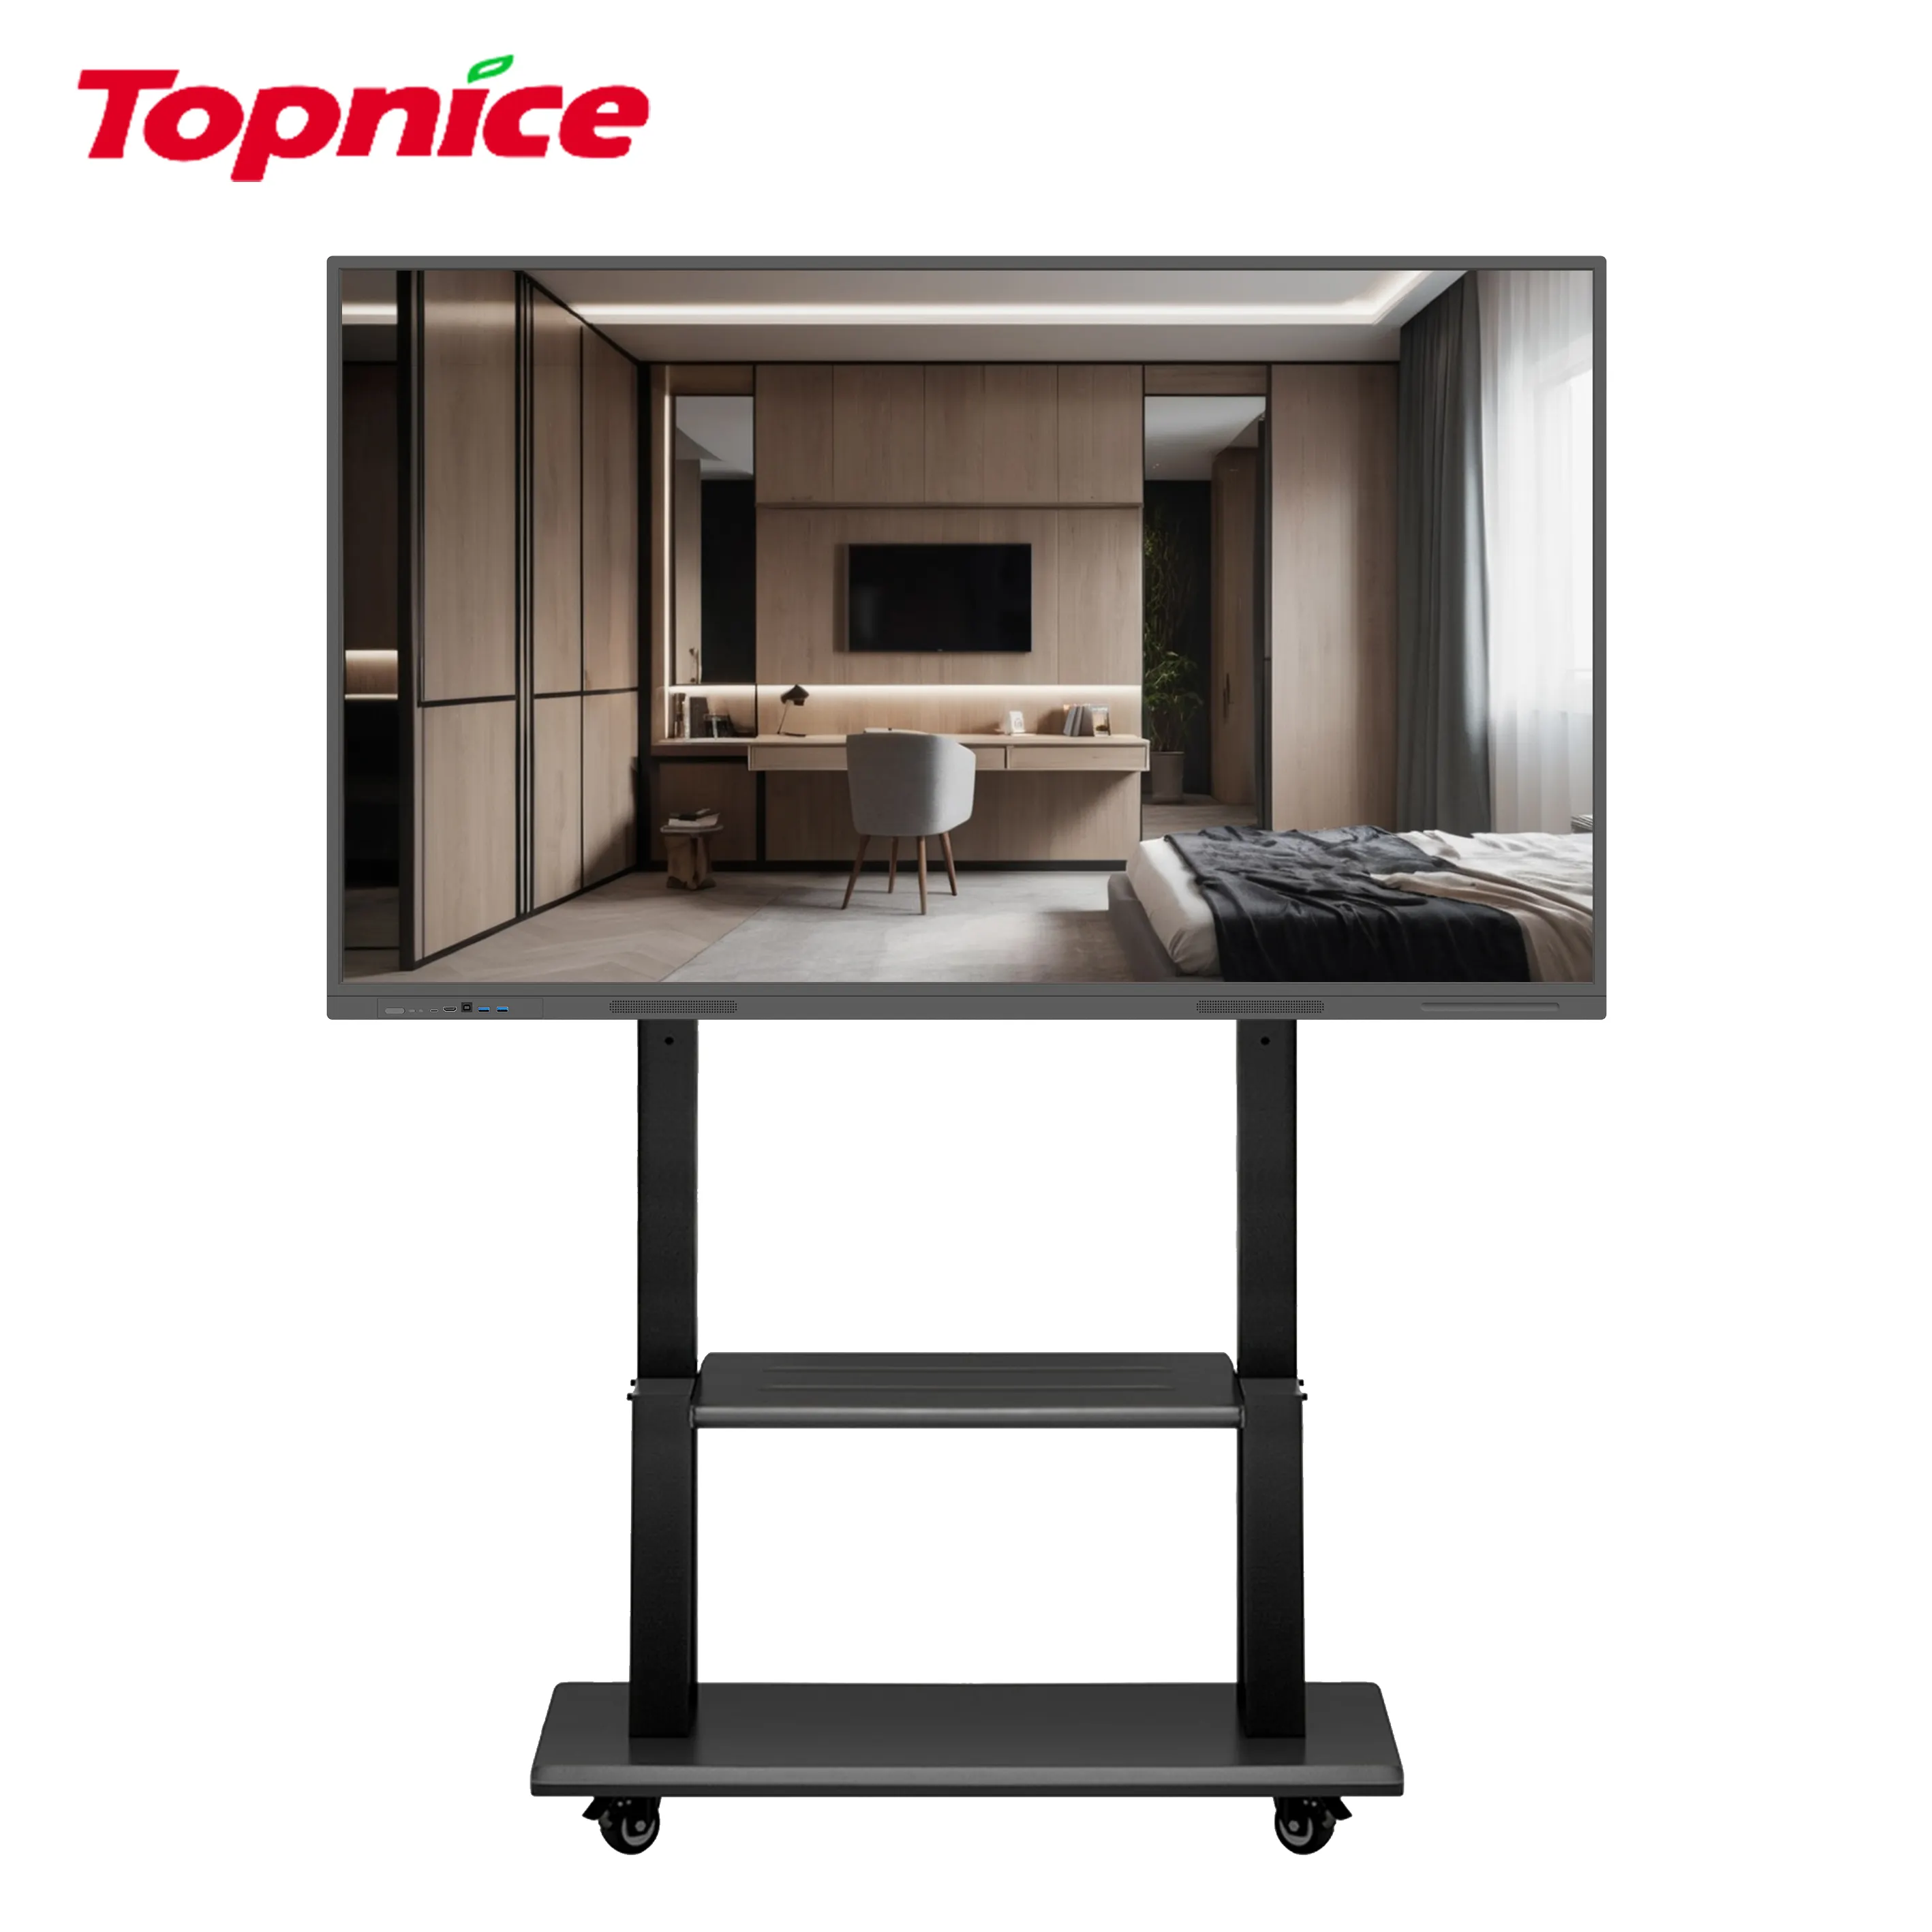 topnice interactive smart boards support writing conference machine for meeting room use large screen digital signage